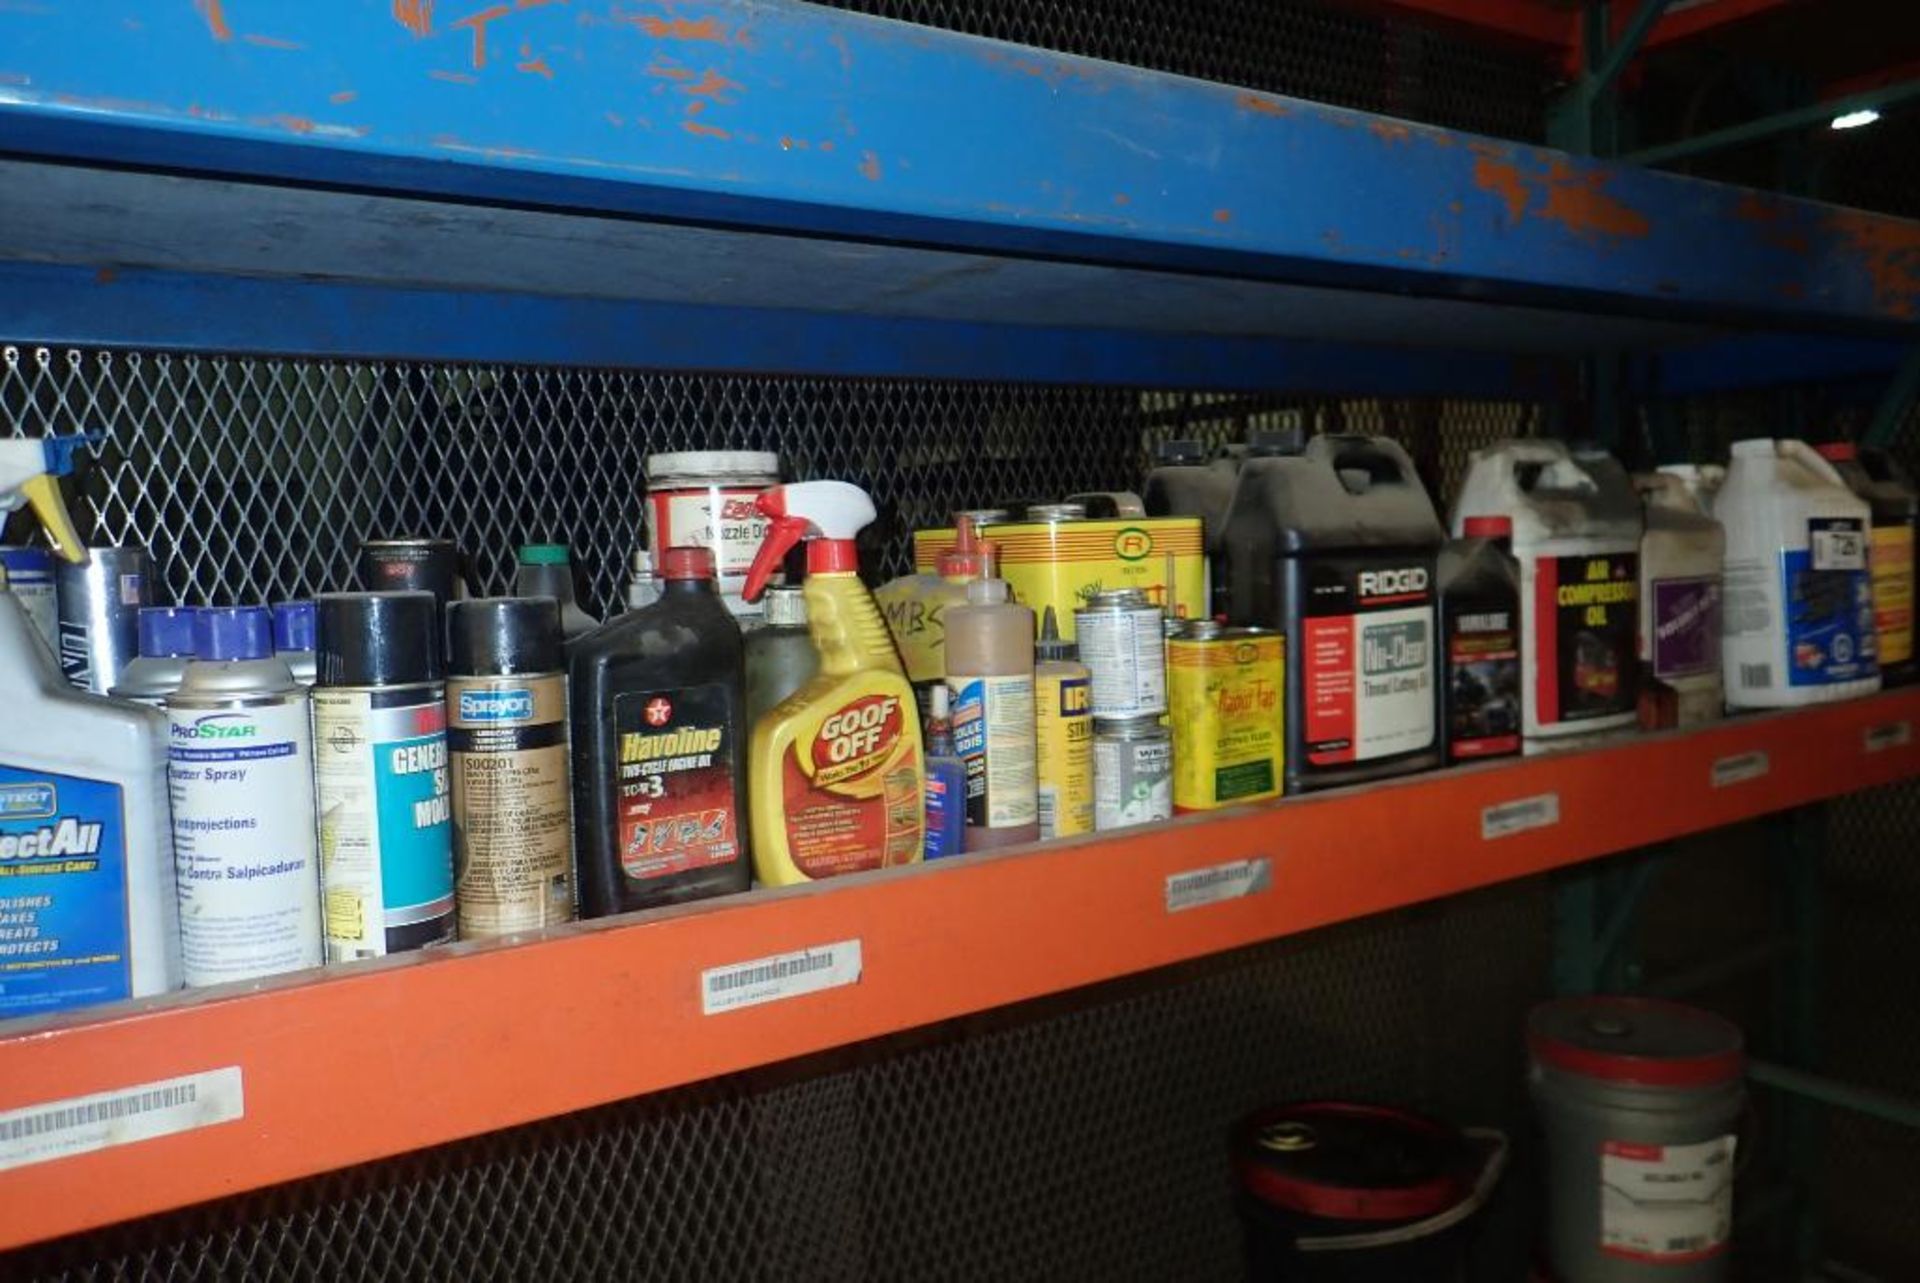 Lot of Asst. Shop Fluid including Oil, Antifreeze, Cutting Oil, Adhesive, etc. - Image 3 of 6